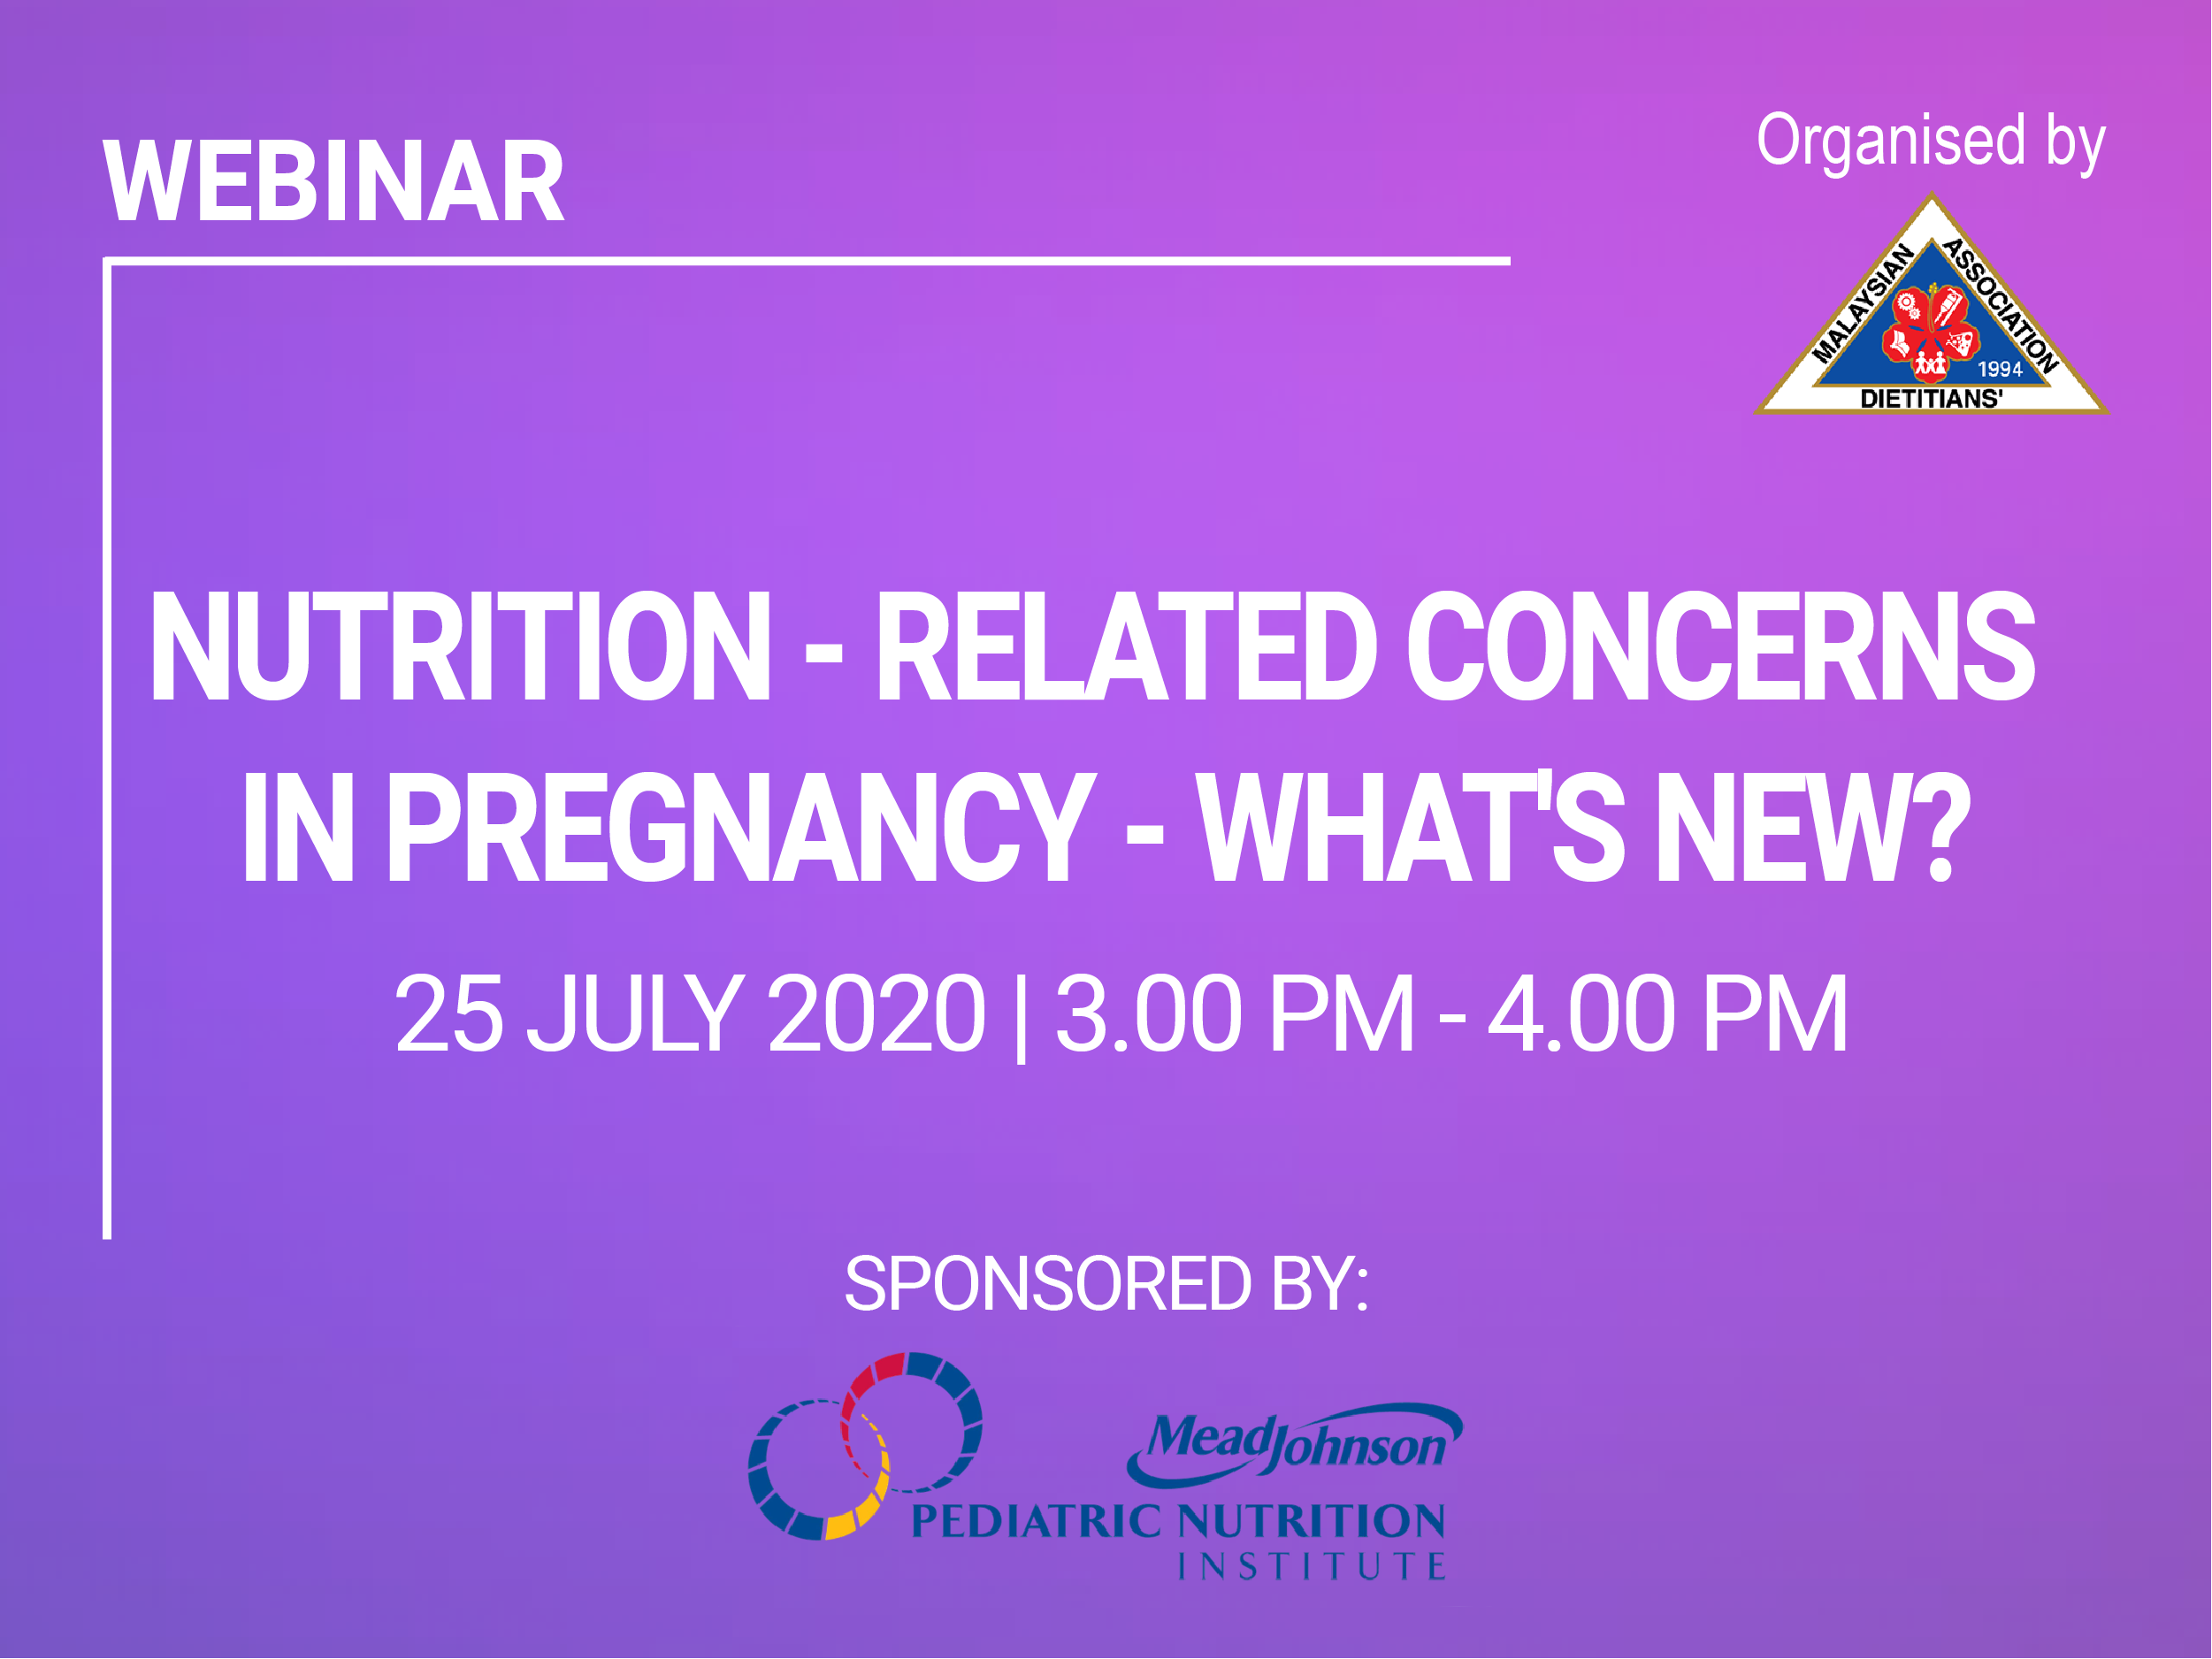 Nutrition - Related Concerns in Pregnancy - What's New?